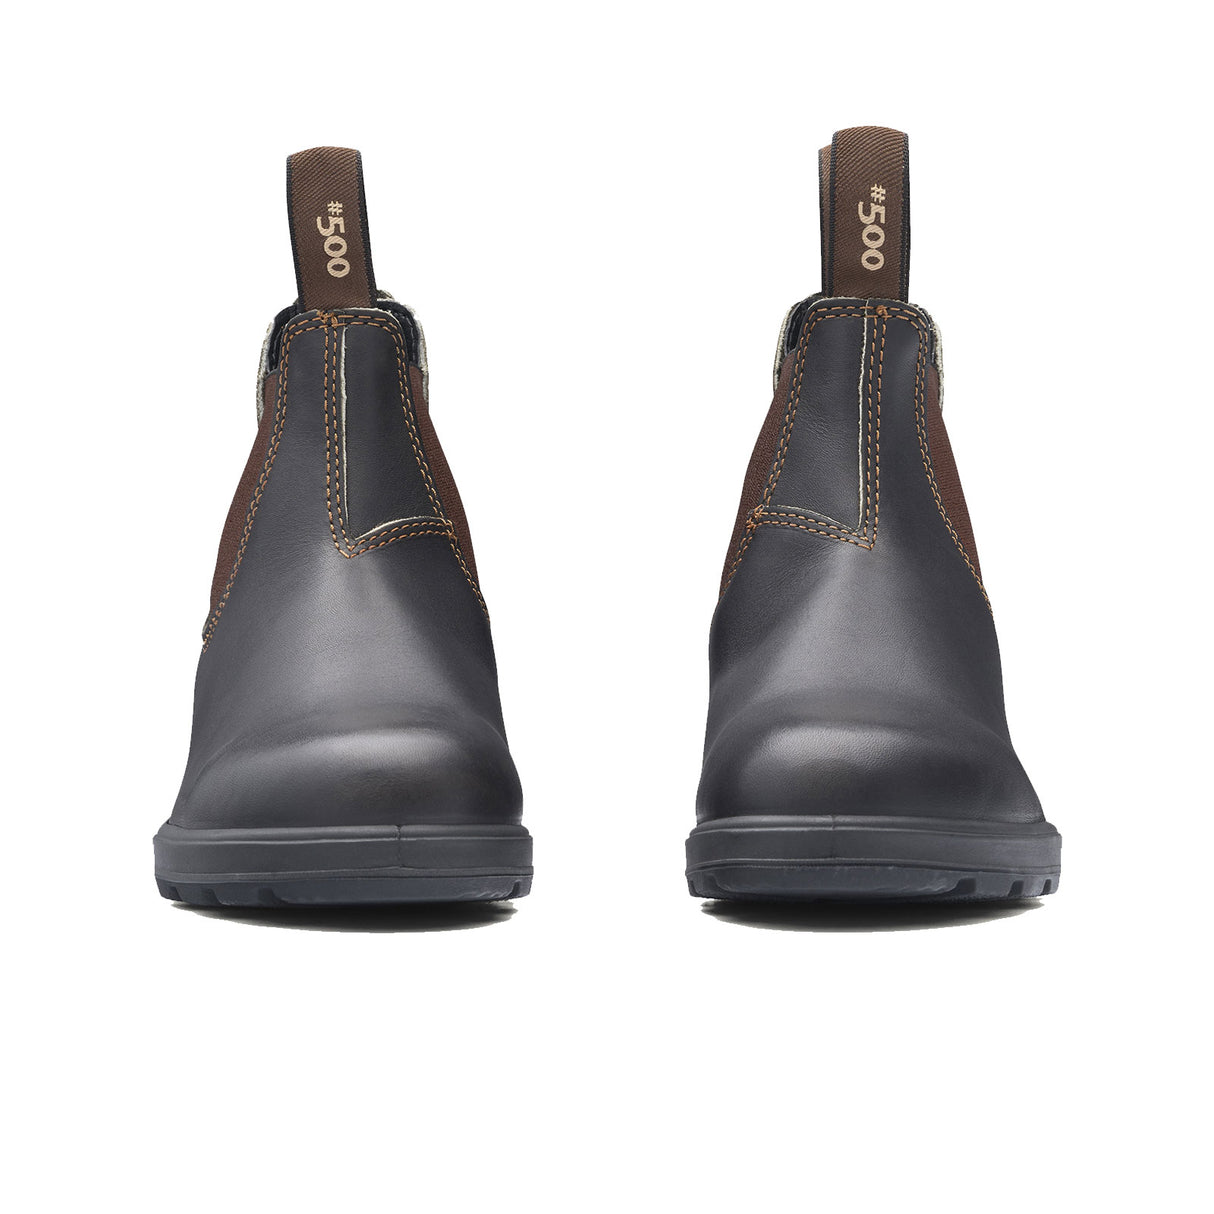 Blundstone Original 500 Chelsea Boot (Unisex) - Stout Brown Boots - Fashion - Chelsea - The Heel Shoe Fitters